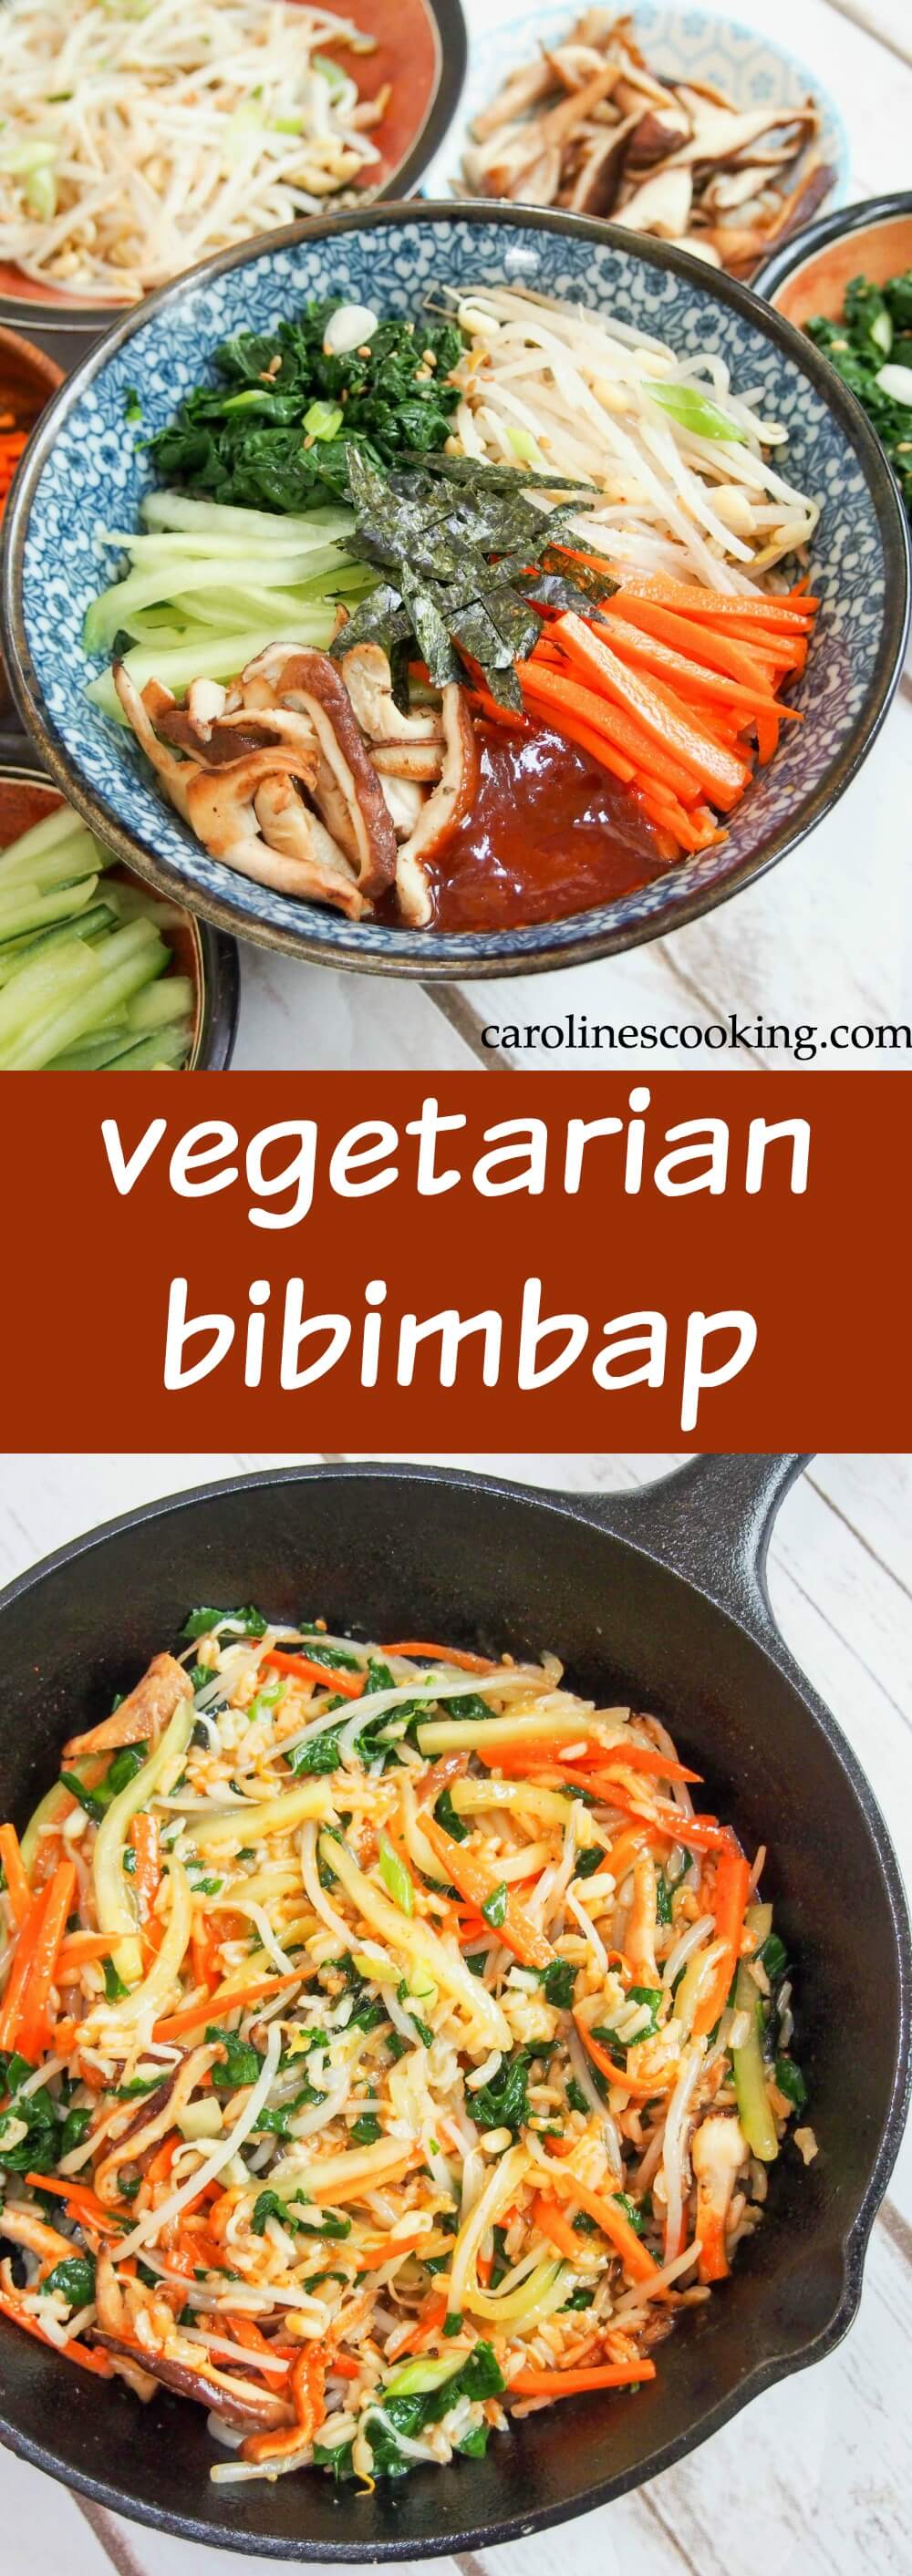 Vegetarian bibimbap: All too often, comfort food and healthy don't go together, but this vegetarian bibimbap is an exception.  It's a delicious bowl of goodness, packed with a rainbow of vegetables and here made with brown rice.  So tasty!  #vegetarian #koreanfood #bibimbap